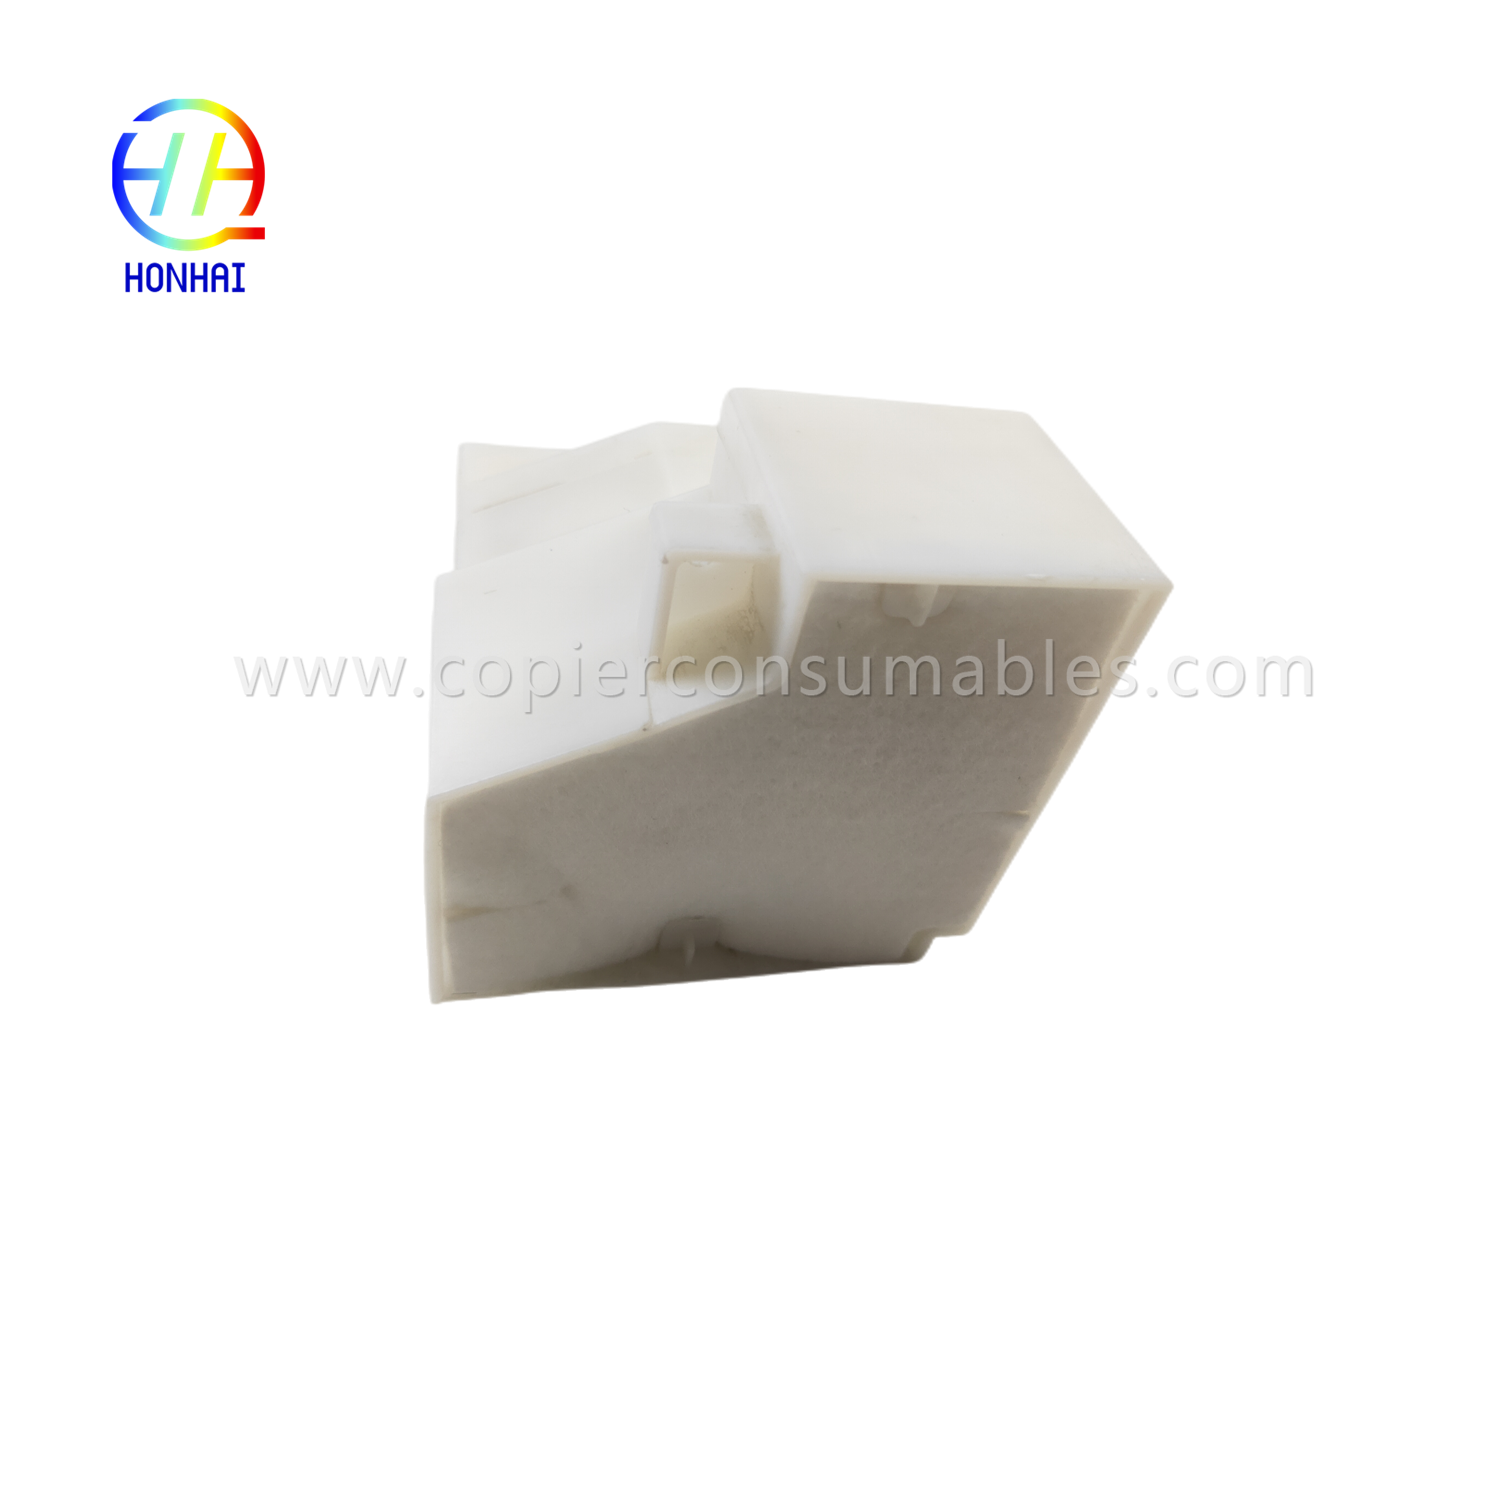 https://c585.goodao.net/waste-ink-pad-for-epson-l800-l805-l810-l850-r280-r290-product/